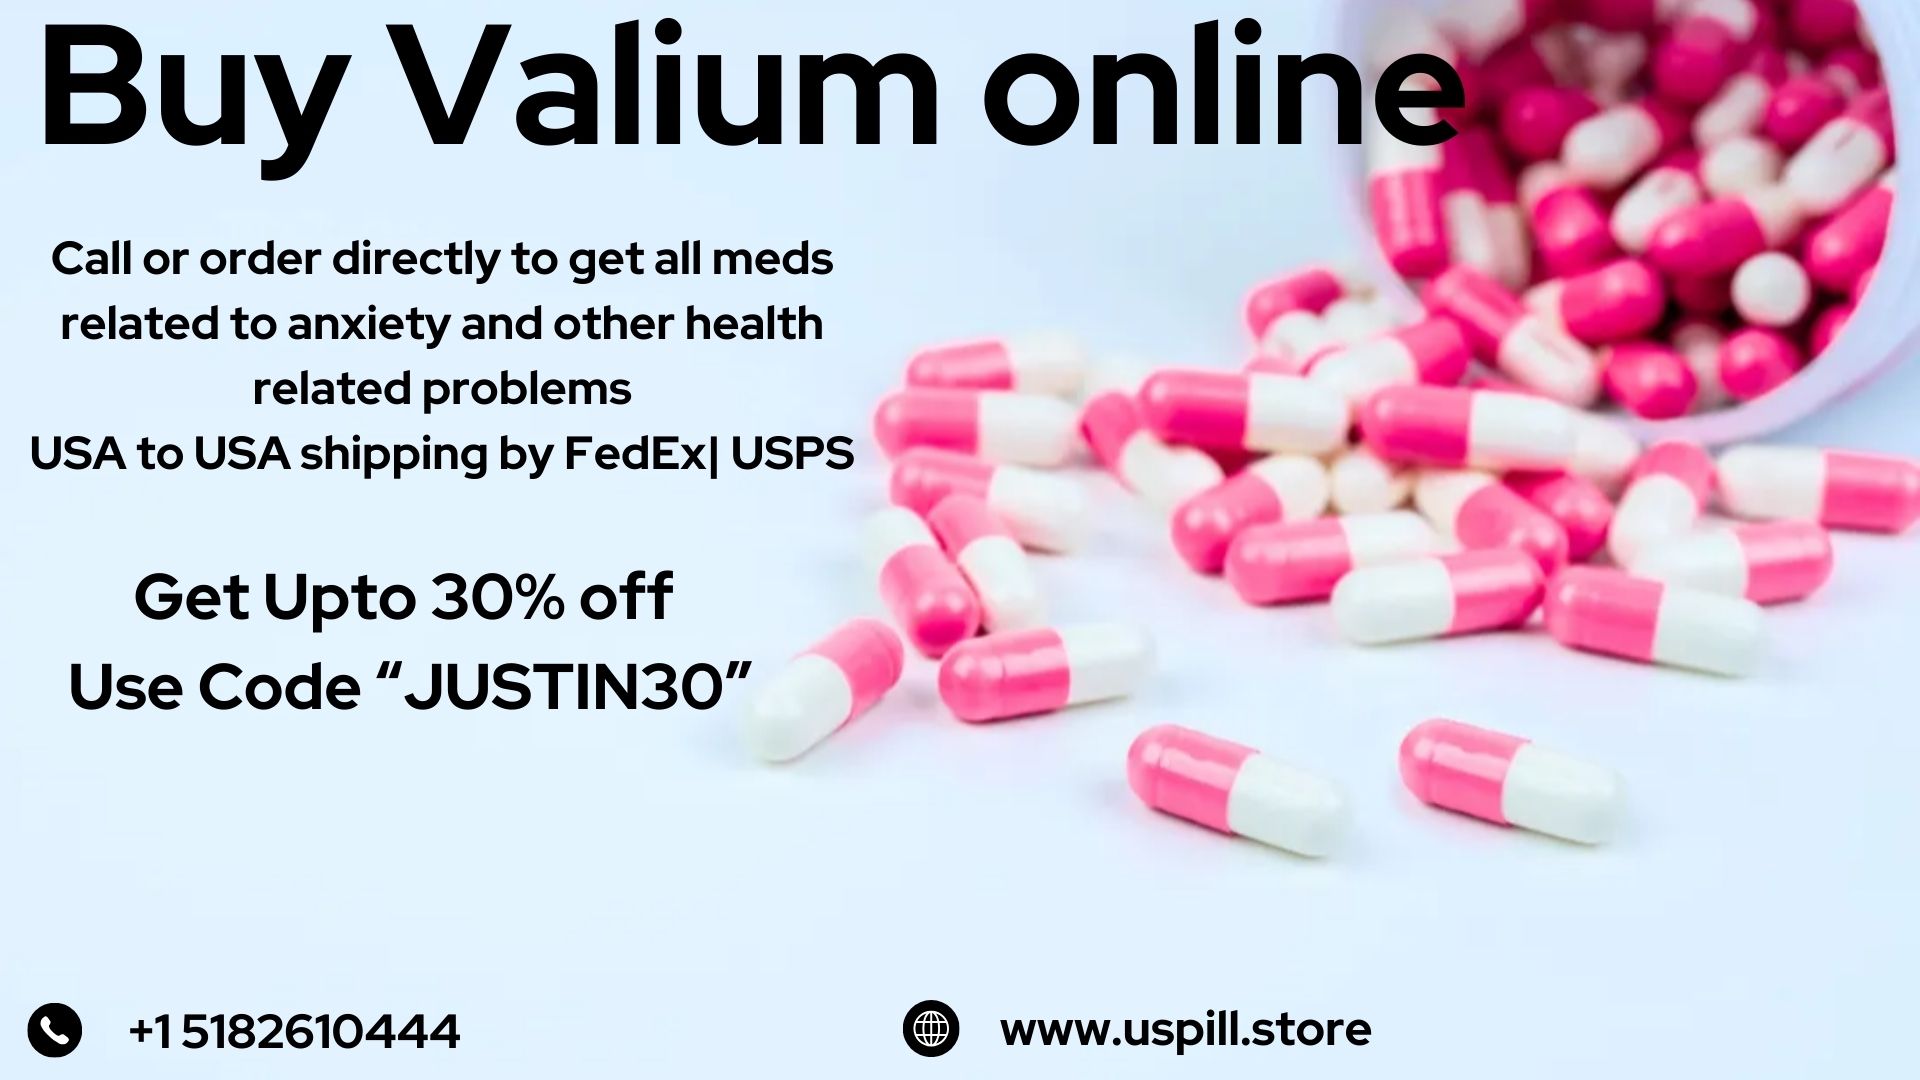 Buy Valium 10mg online with doorstep delivery and get 30 of - California - Bakersfield ID1555862